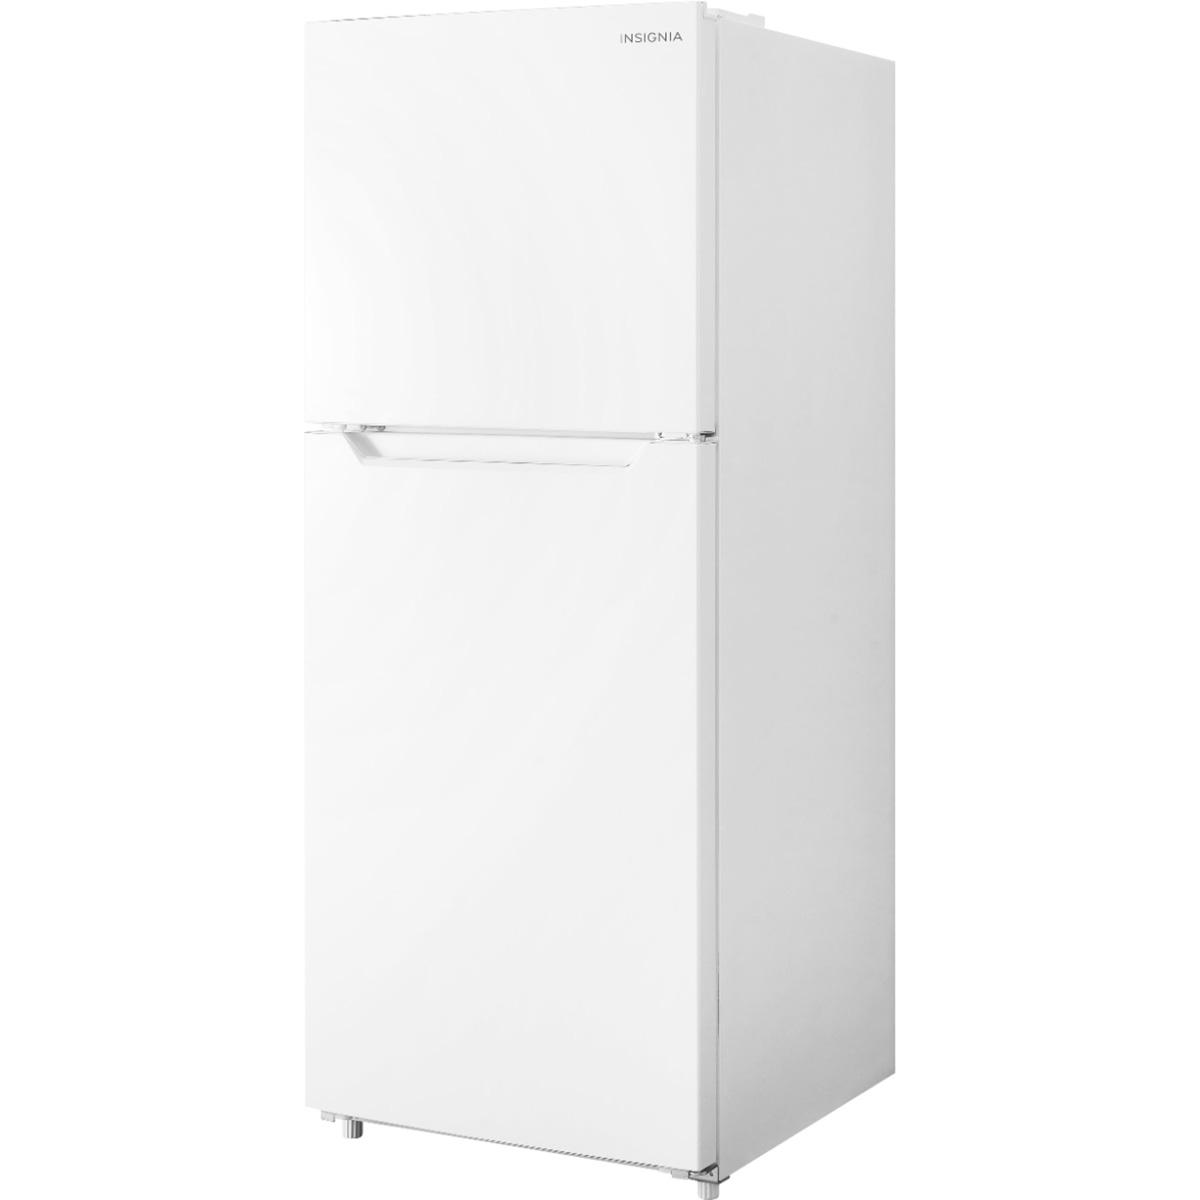 Insignia Top-Freezer Refrigerator with Reversible Door for $299.99 Shipped